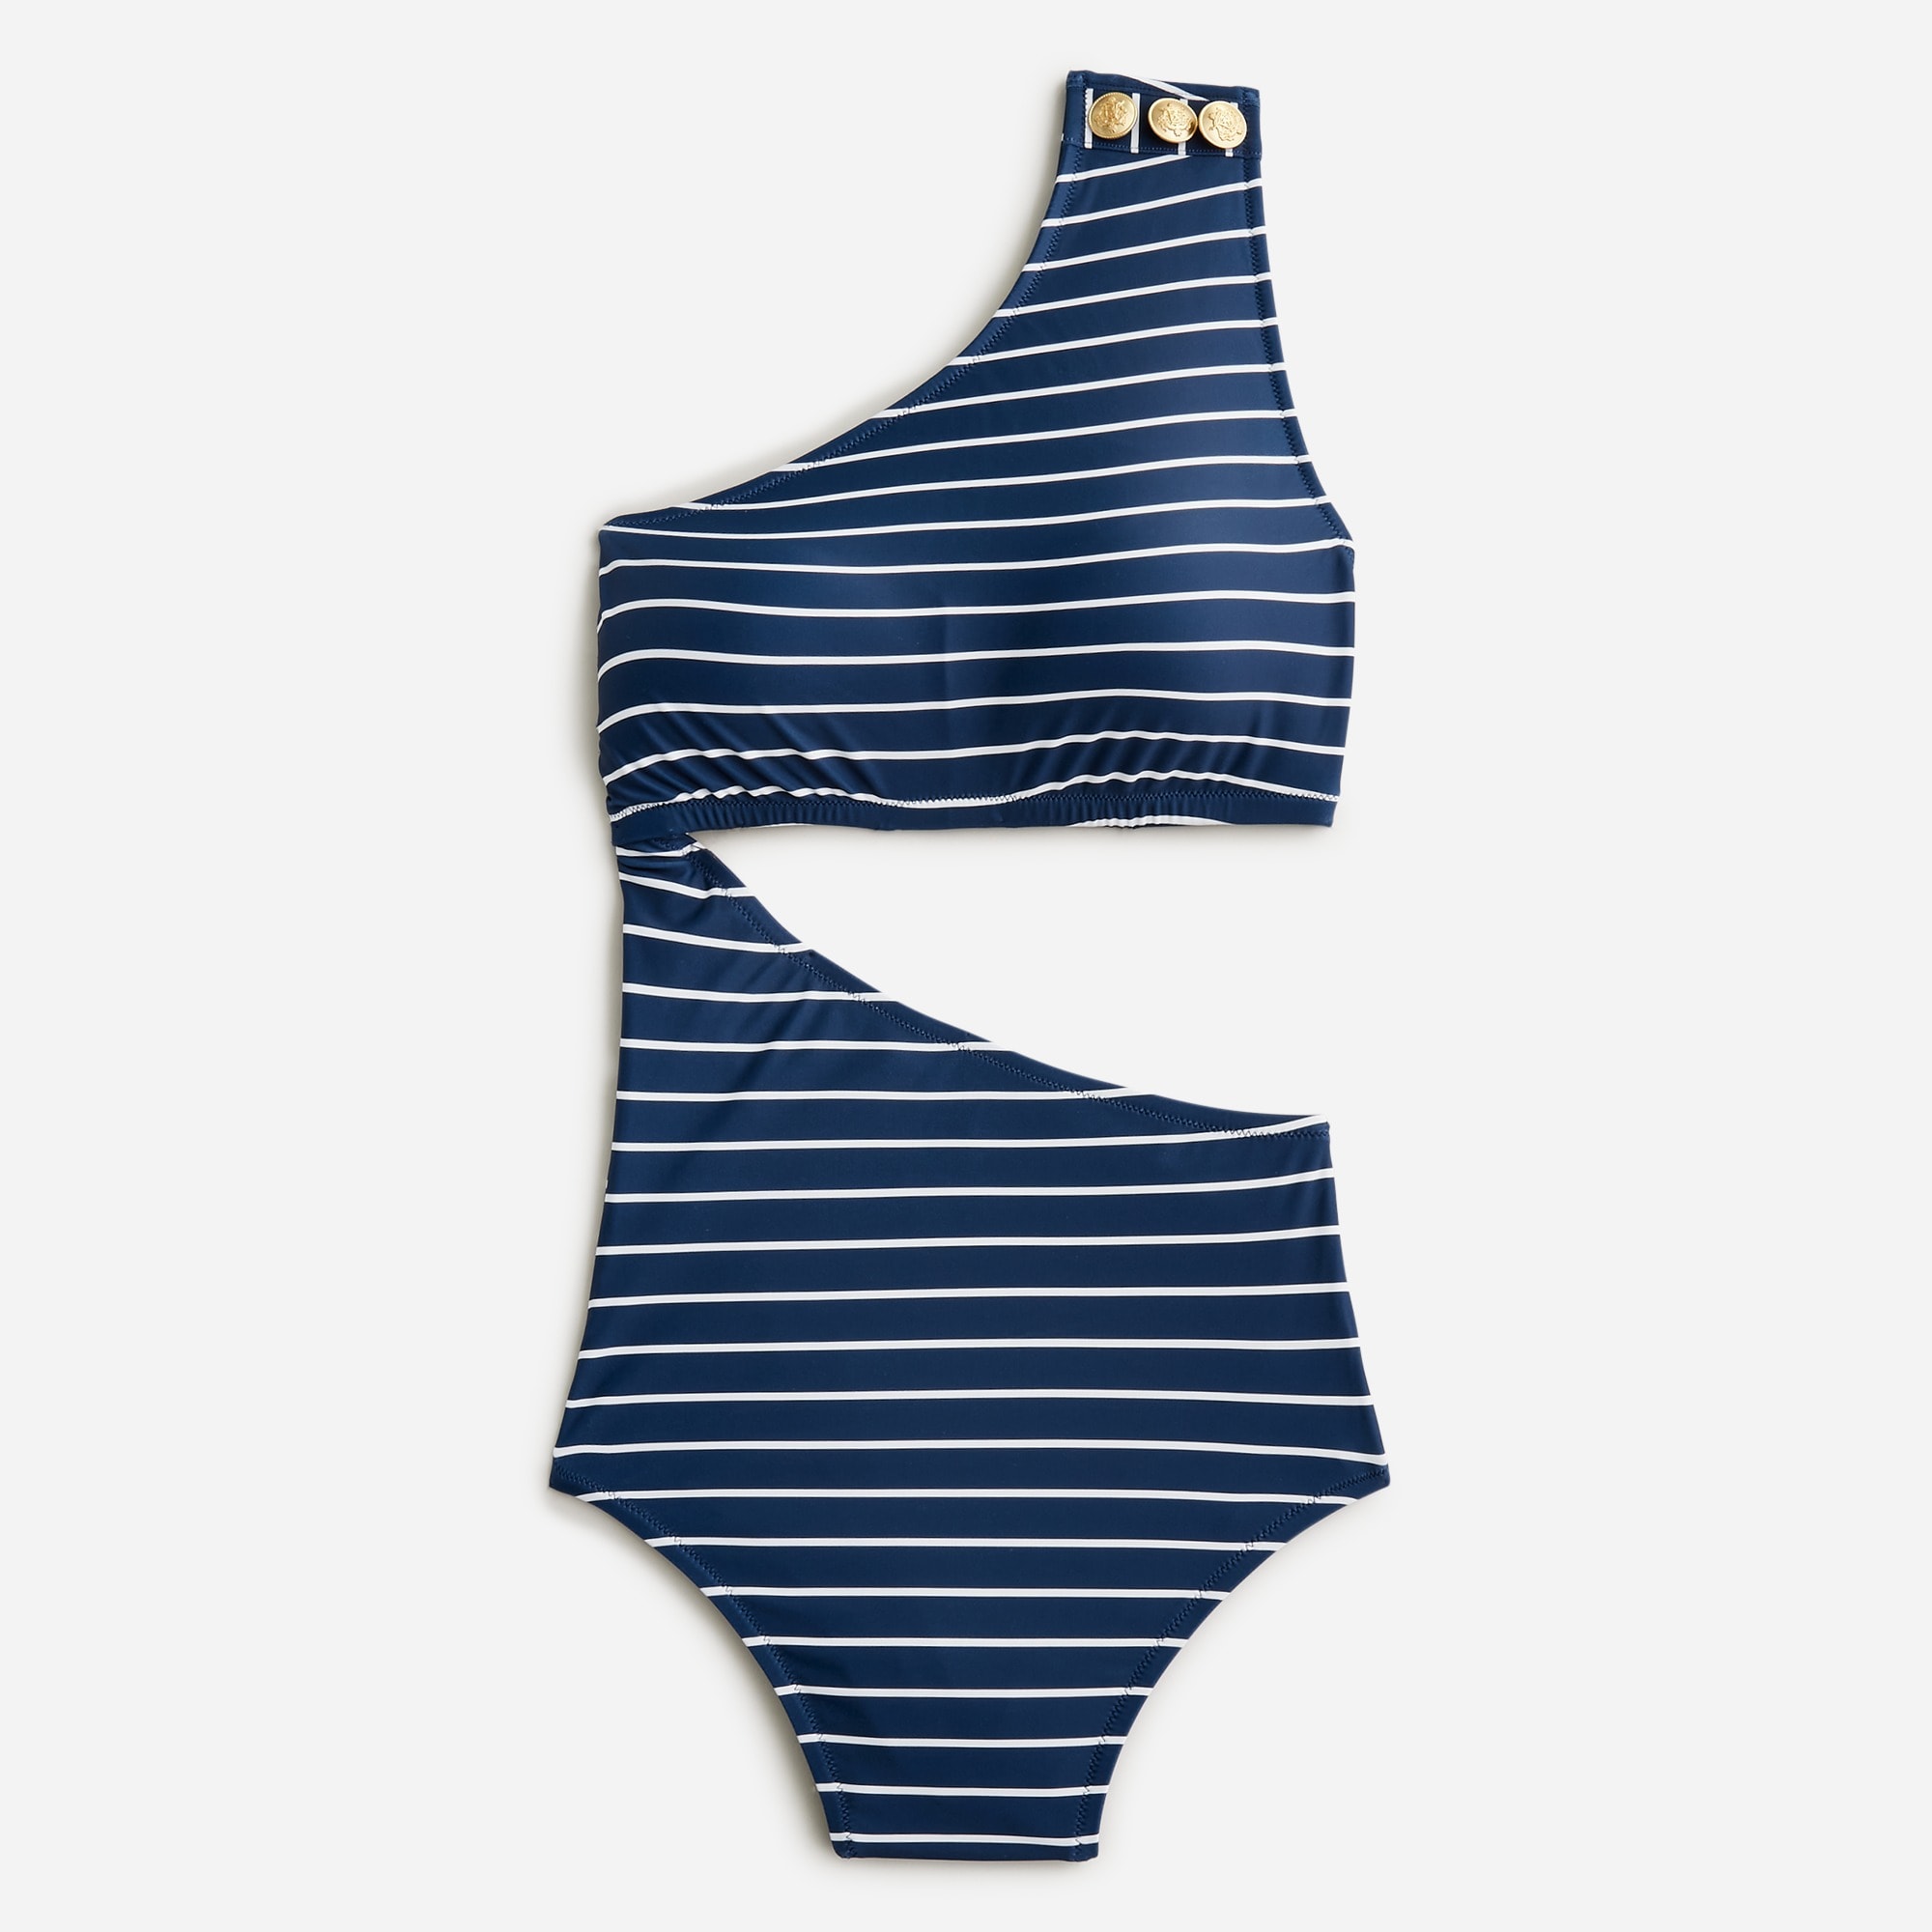  Cutout one-piece full-coverage swimsuit with buttons in navy stripe